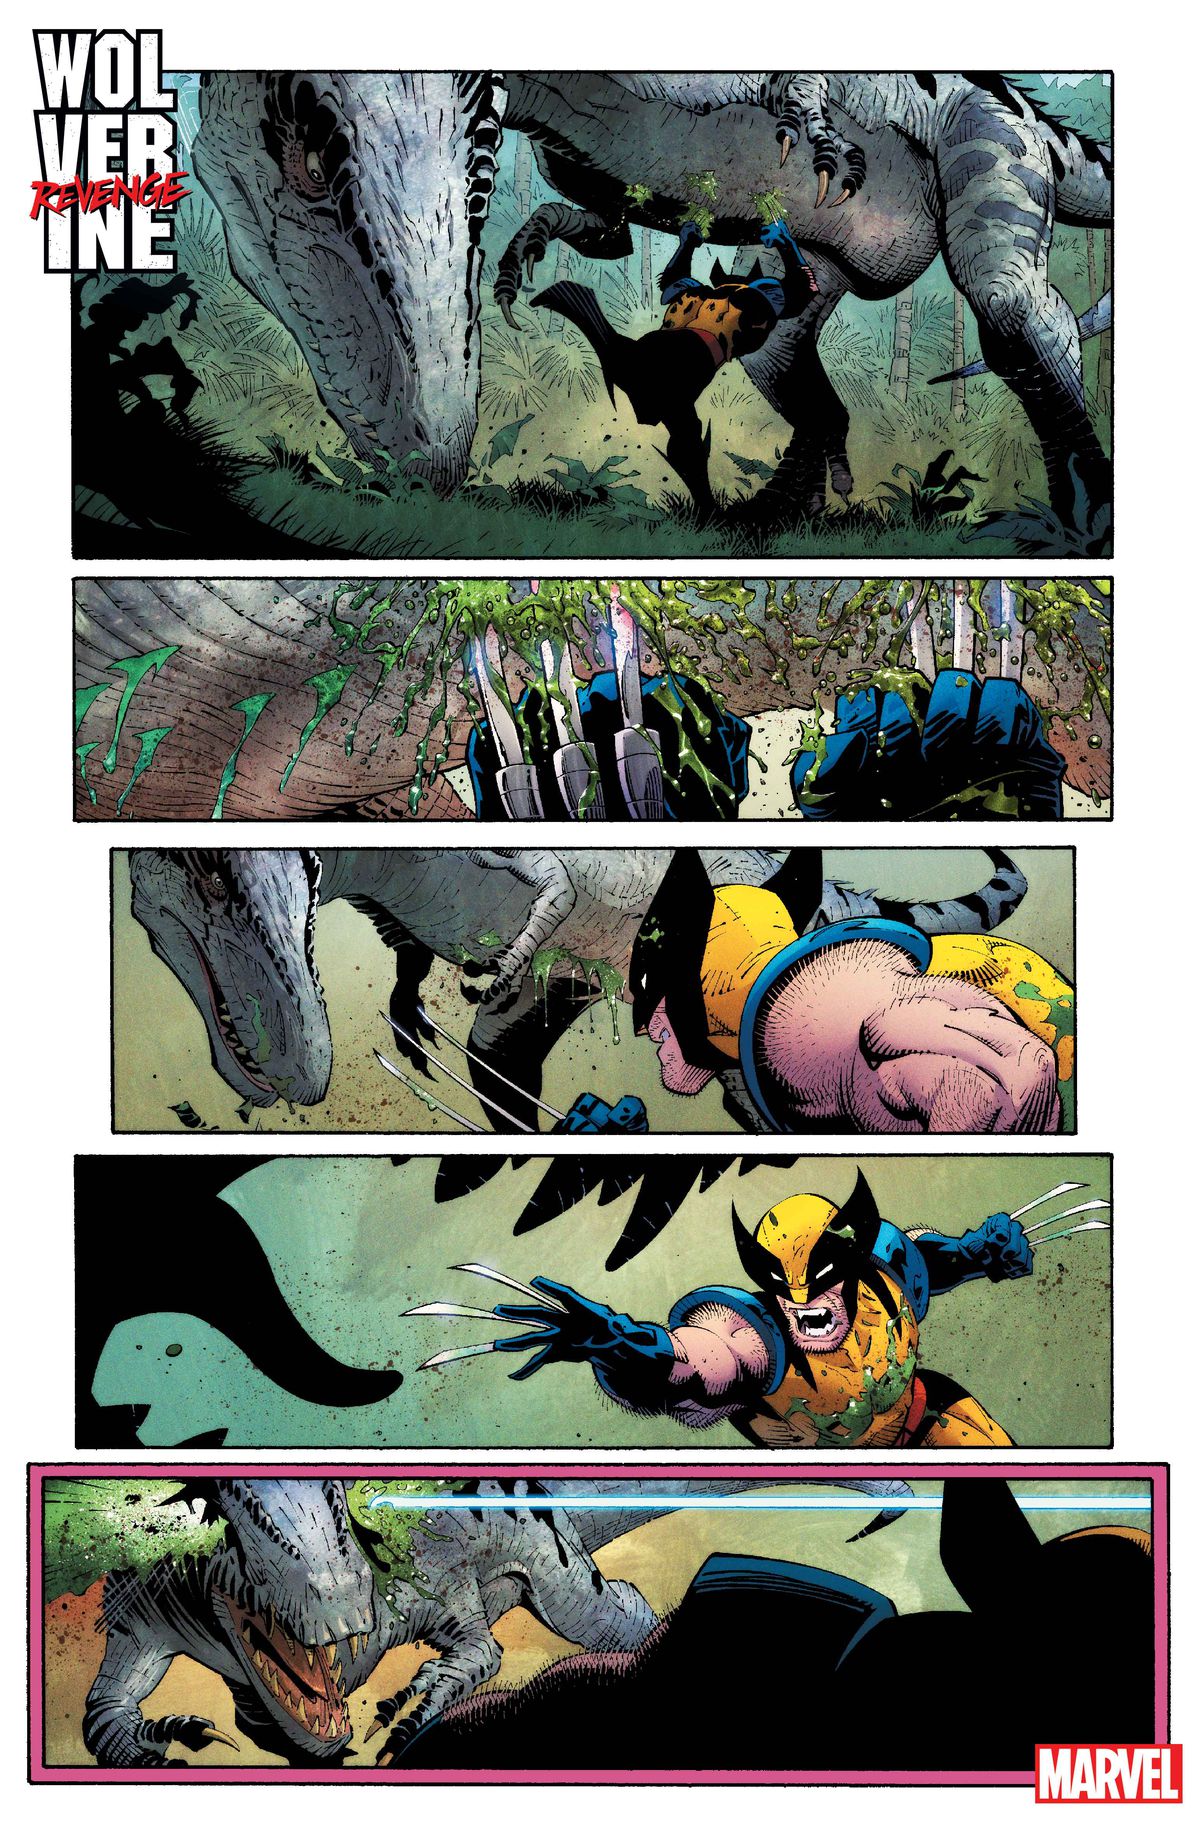 Wolverine runs beneath a therapod-type dinosaur, slashing at its belly with his claws. He and the dinosaur square off and are about to clash again when a projectile or laser of some kind shoots in from off panel, blasting through the dinosaur’s head from eye to eye, in Wolverine: Revenge #1.